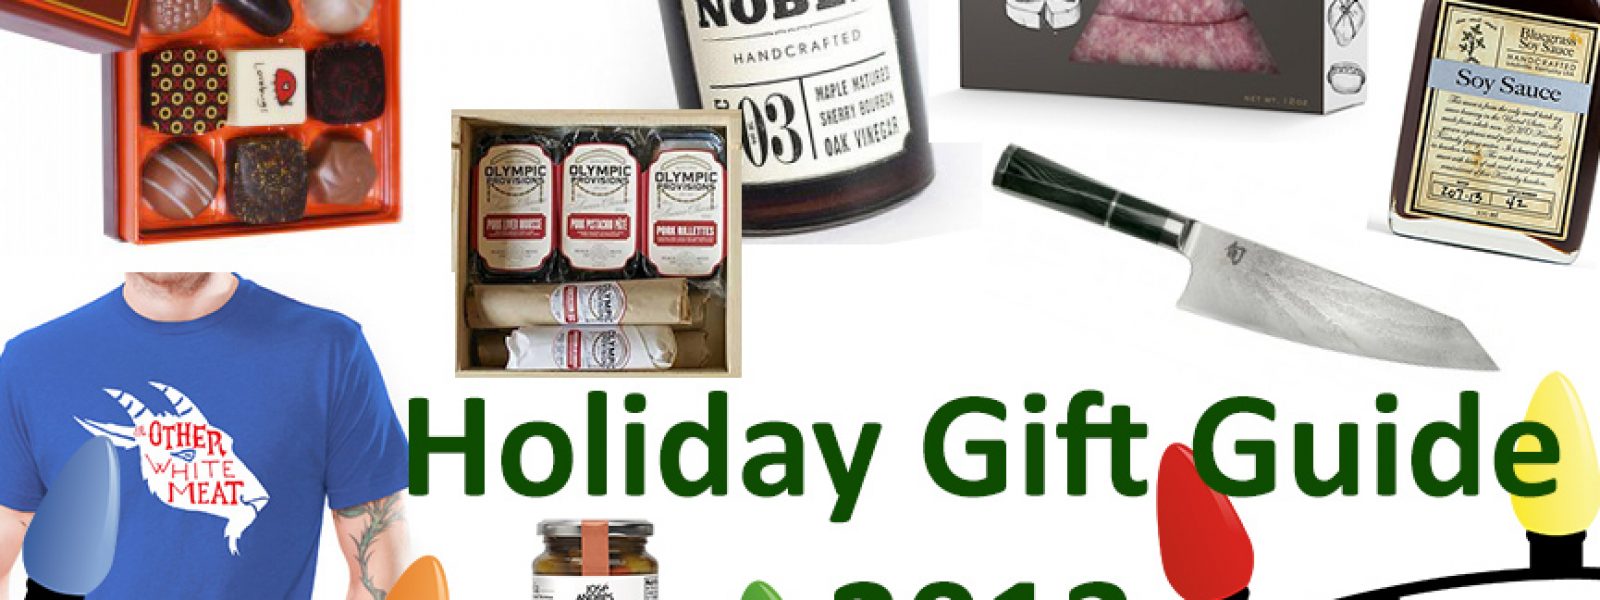 Edible Stocking Stuffers for Food Lovers - Andrew Zimmern